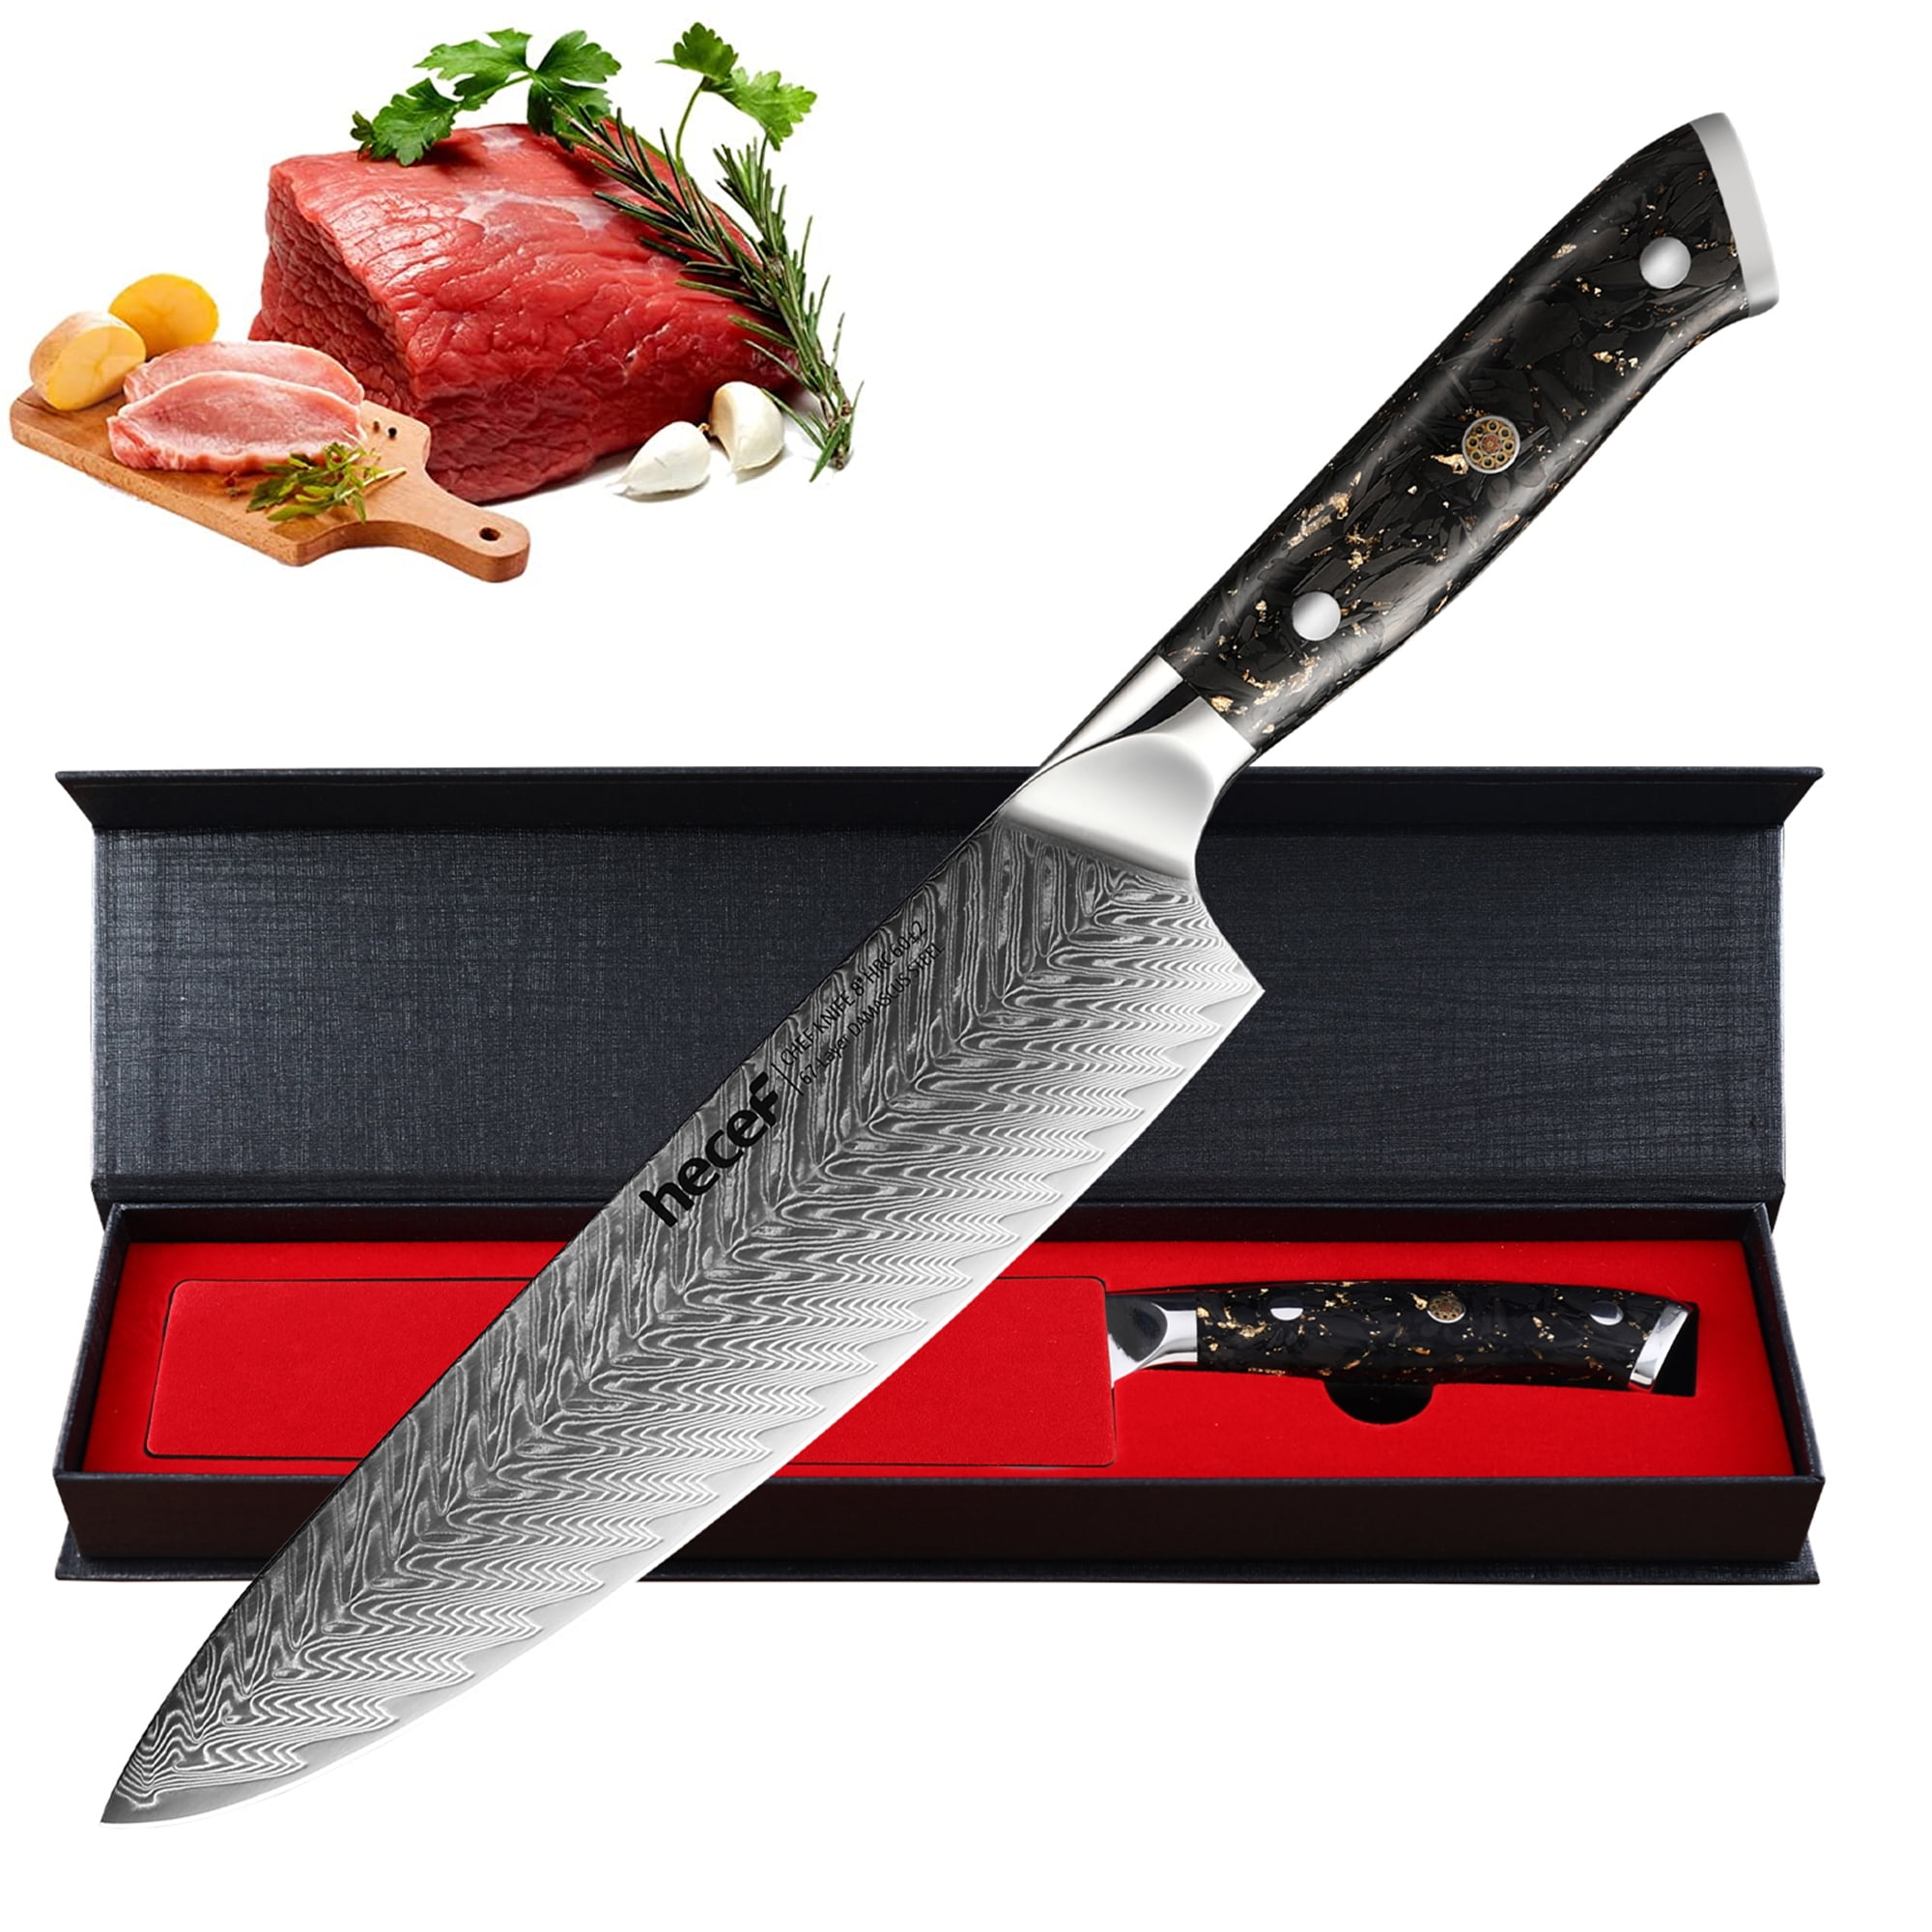 Hecef Chef Knife, inch Japanese Damascus Steel Professional Sharp Kitchen Knife, Anti-rusting Forged Carving Knife - Walmart.com